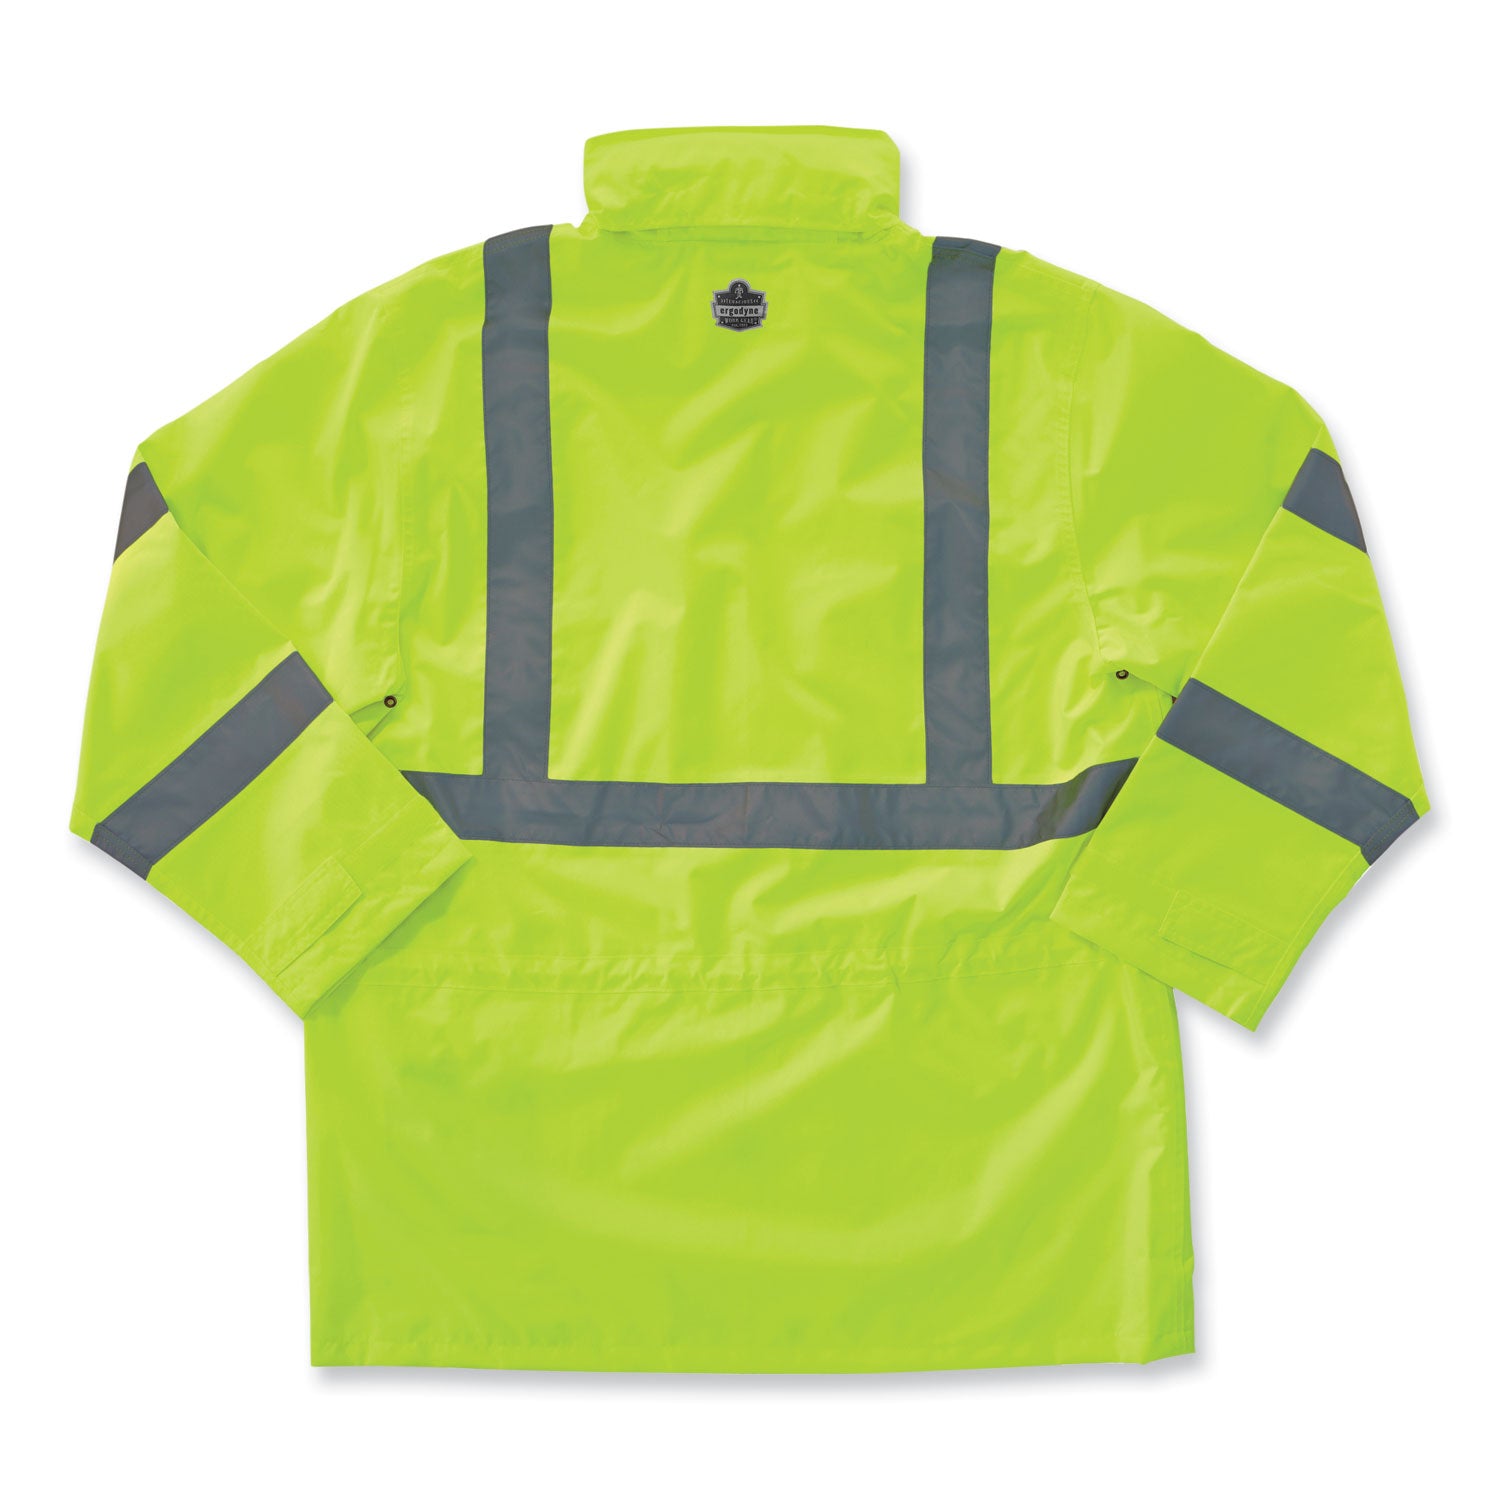 glowear-8365-class-3-hi-vis-rain-jacket-polyester-2x-large-lime-ships-in-1-3-business-days_ego24326 - 2